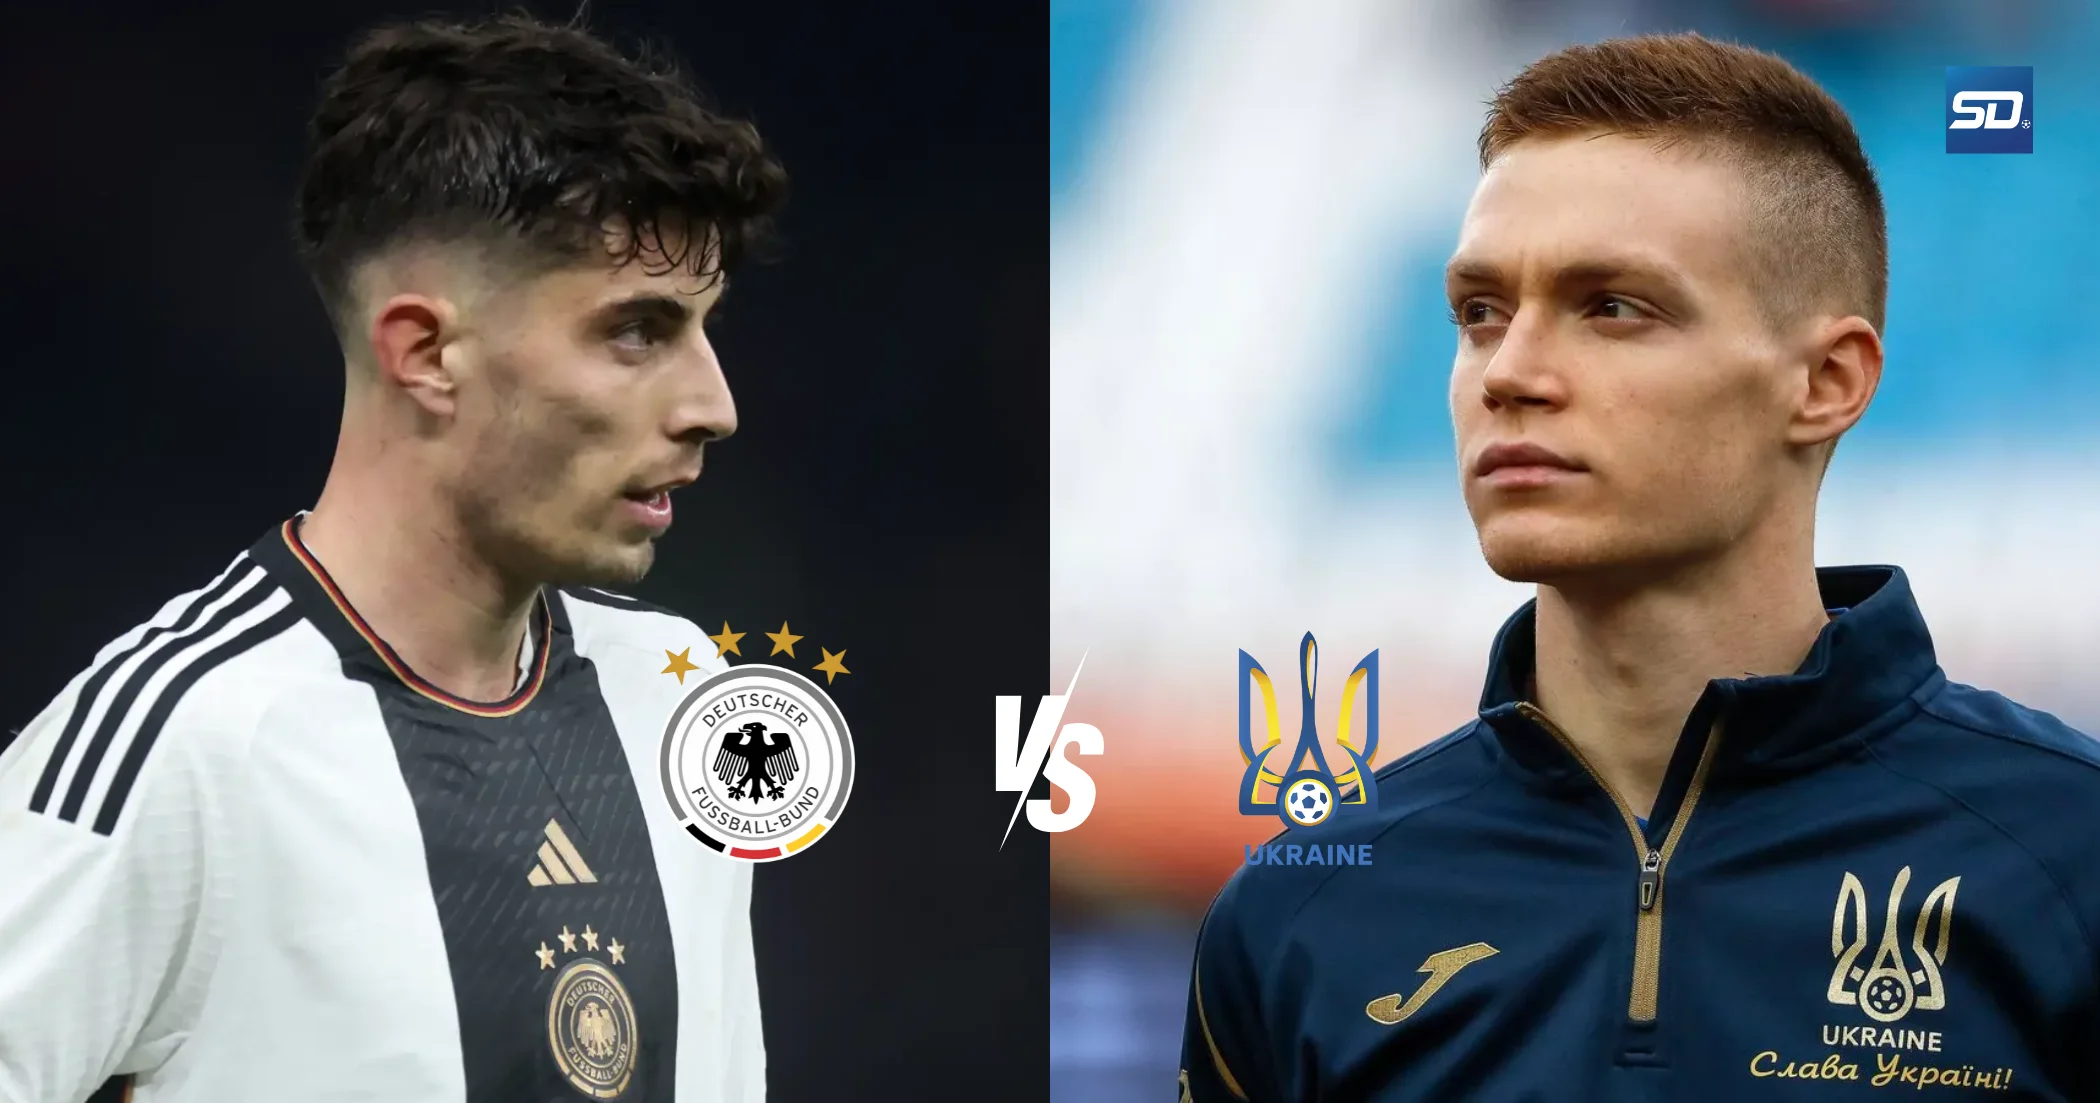 Germany vs Ukraine: Preview, Prediction and Betting Tips